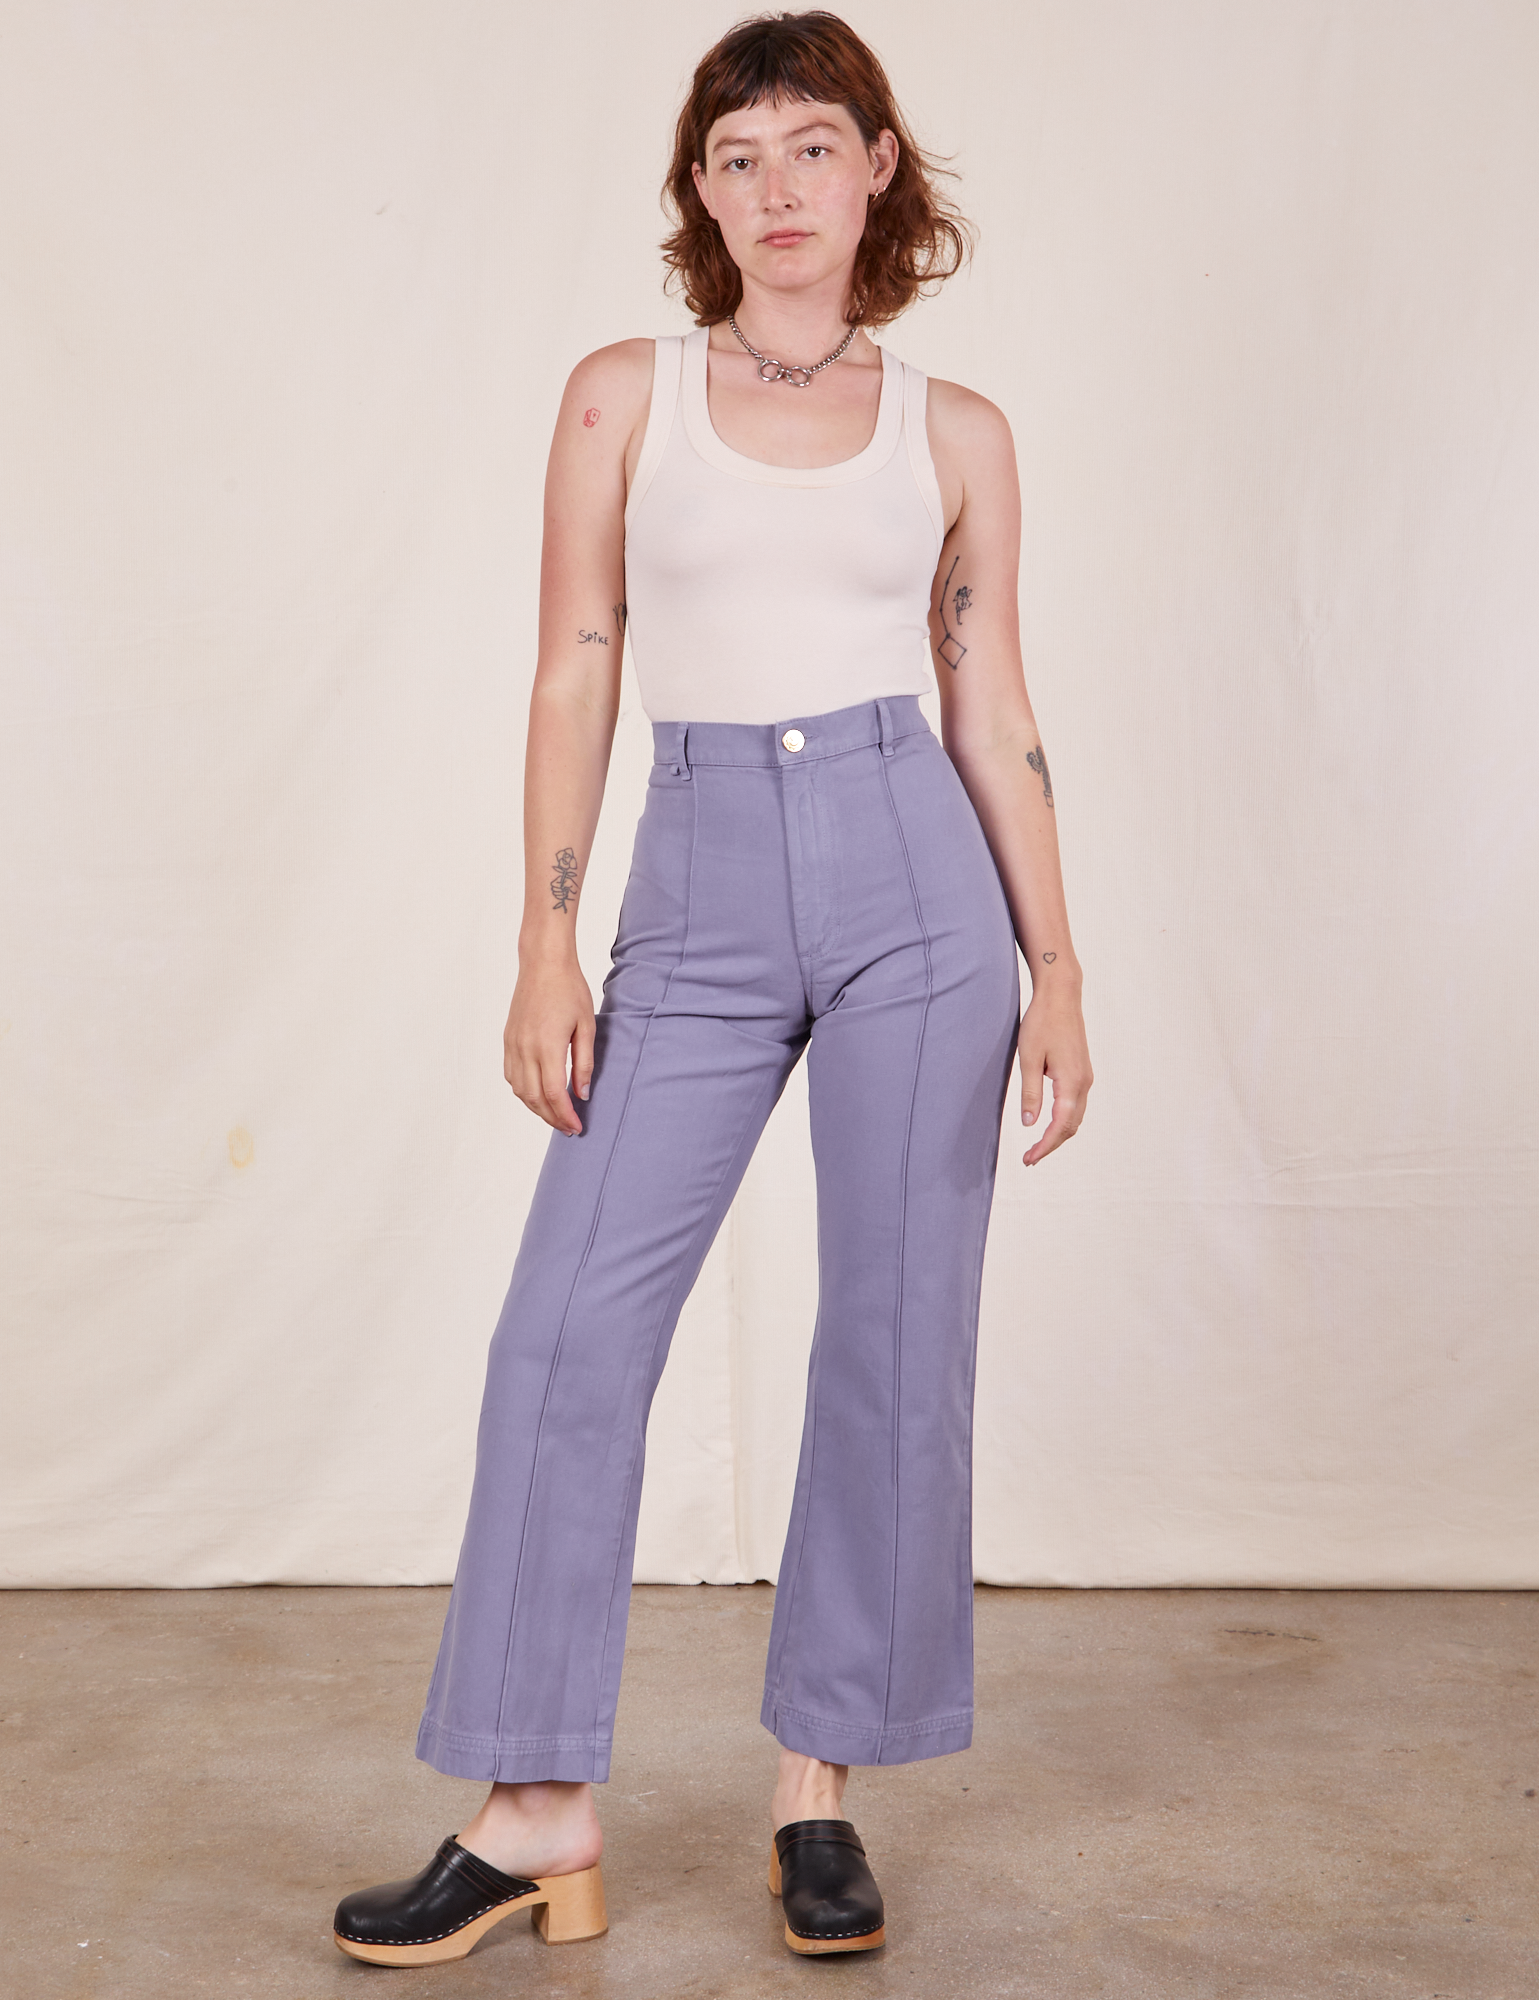 Alex is 5&#39;8&quot; and wearing XS Western Pants in Faded Grape paired with vintage off-white Tank Top